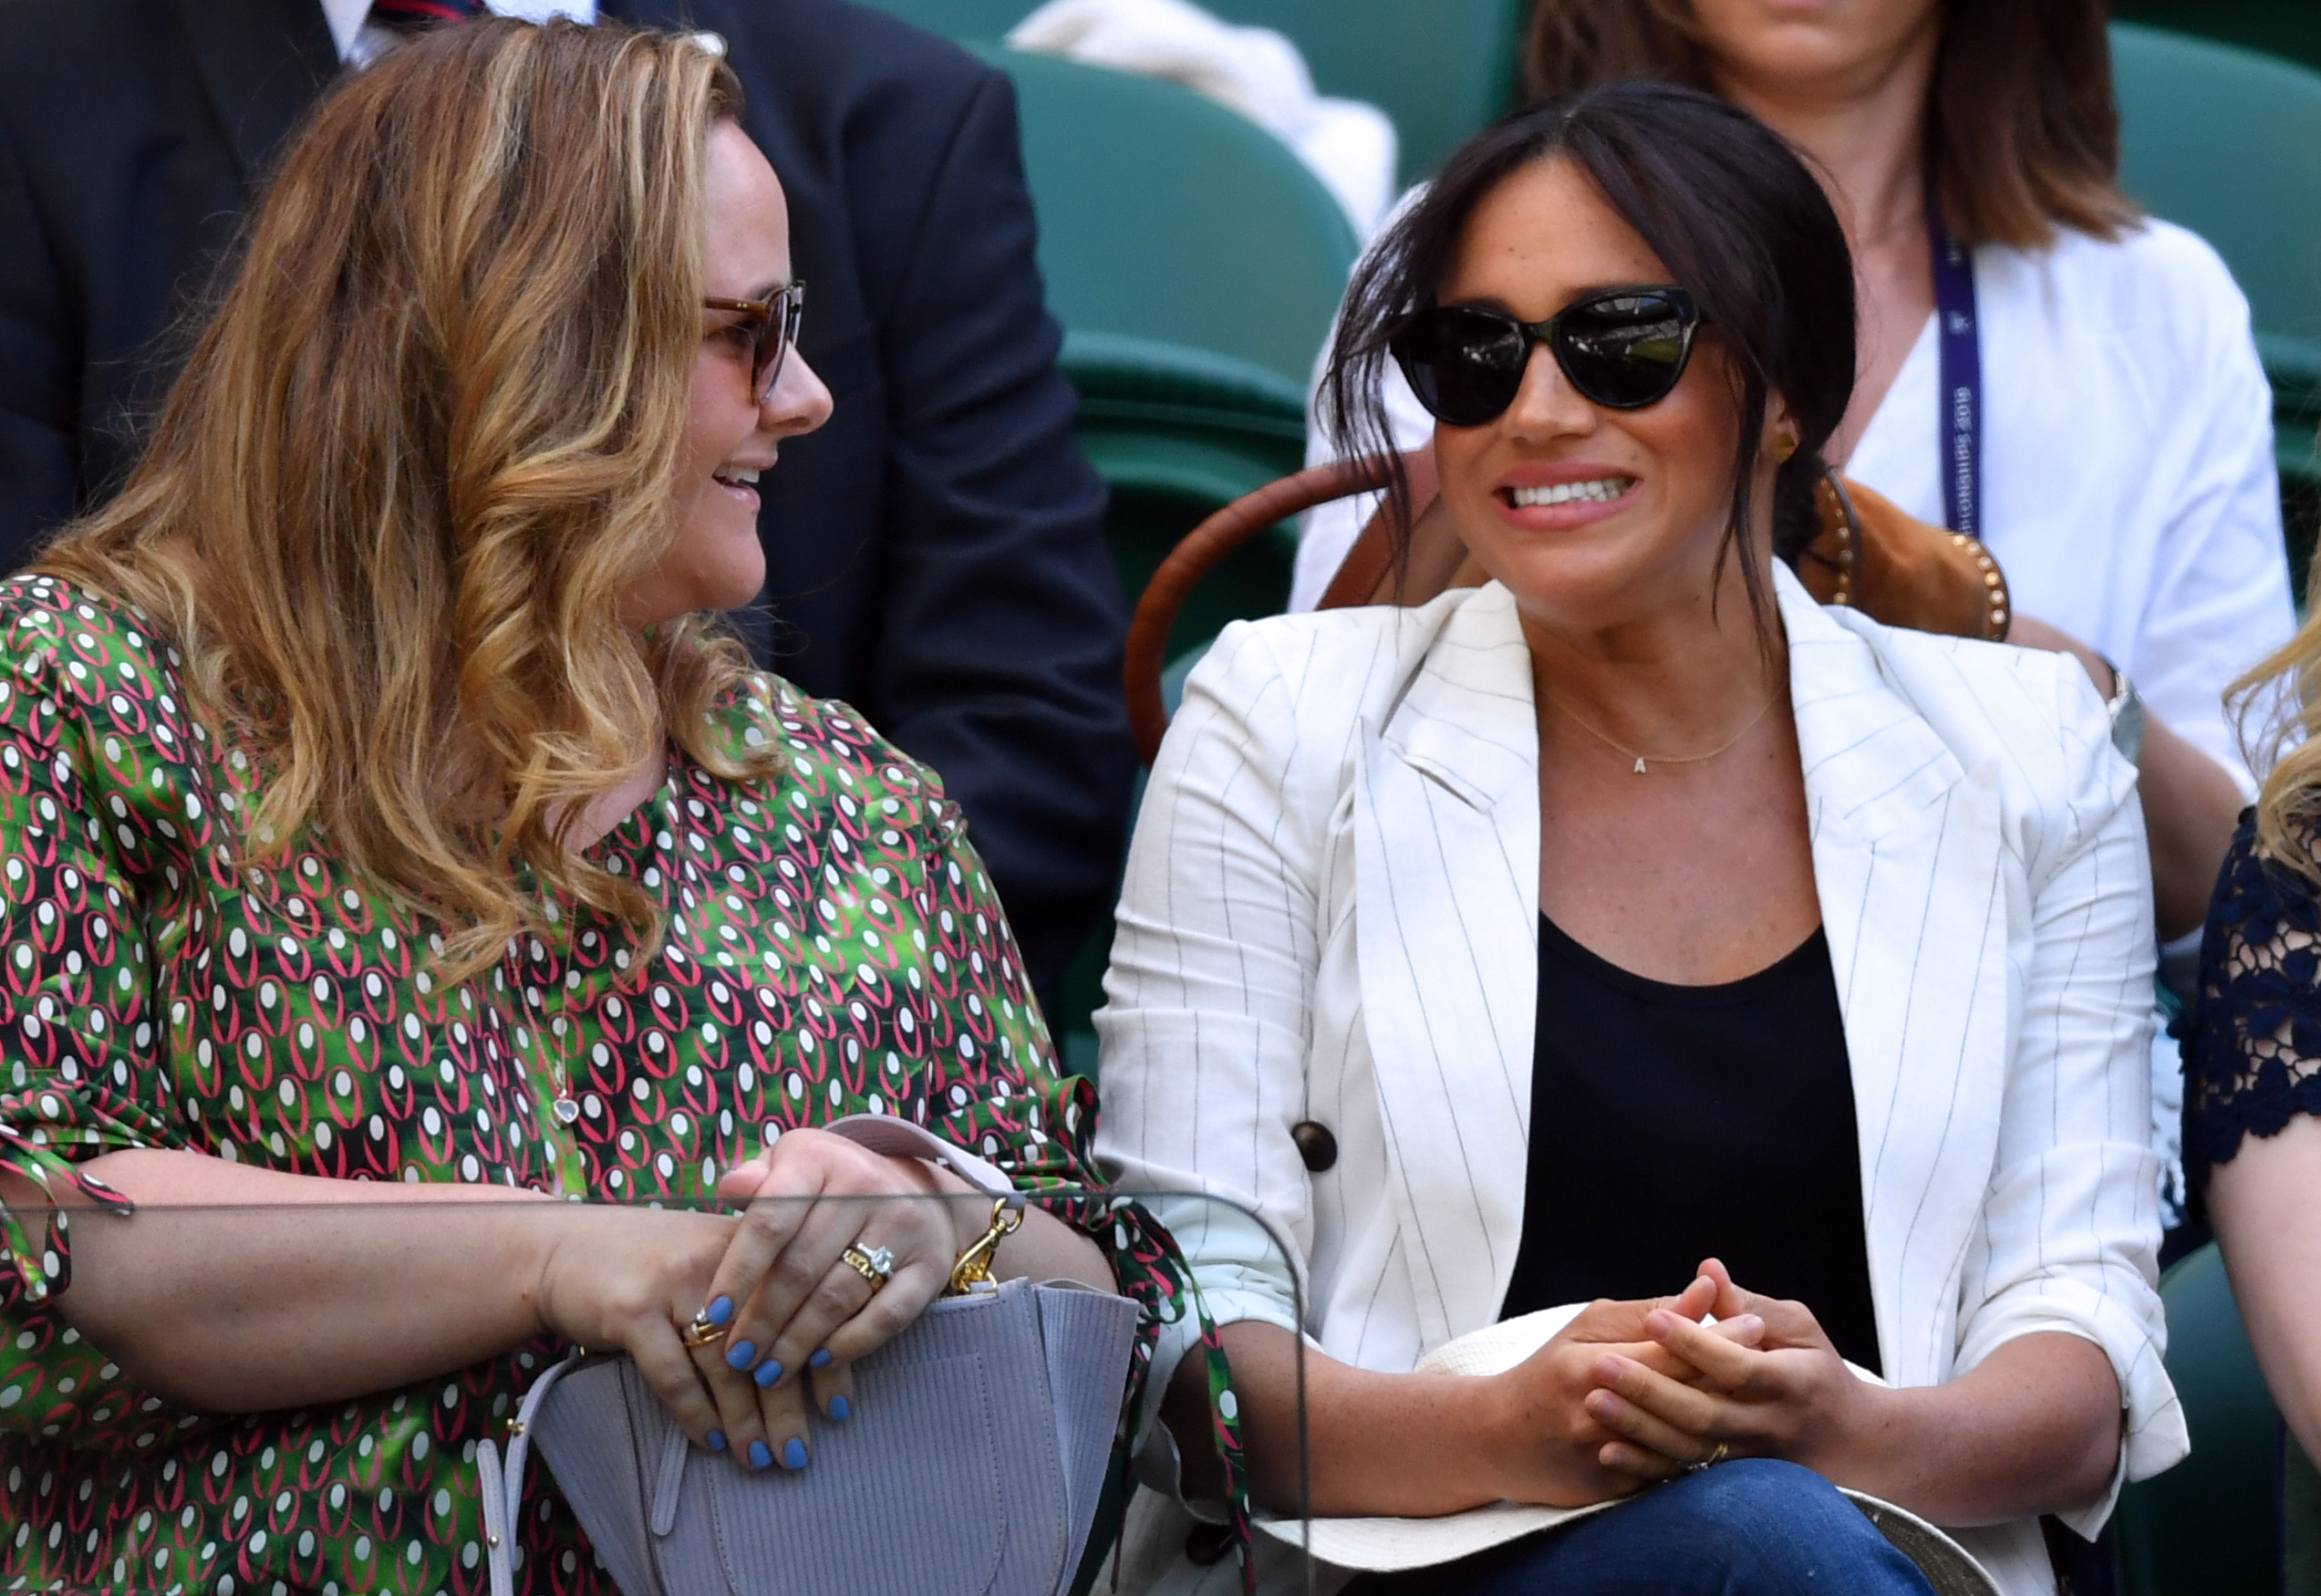 Meghan Markle,  Duchess of Sussex, during the tennis match between Serena Williams and Kaja Juvan on the fourth day of the 2019 Wimbledon Championships at The All England Lawn Tennis Club in Wimbledon, Southwest London, on July 4, 2019 | Source: Getty Images